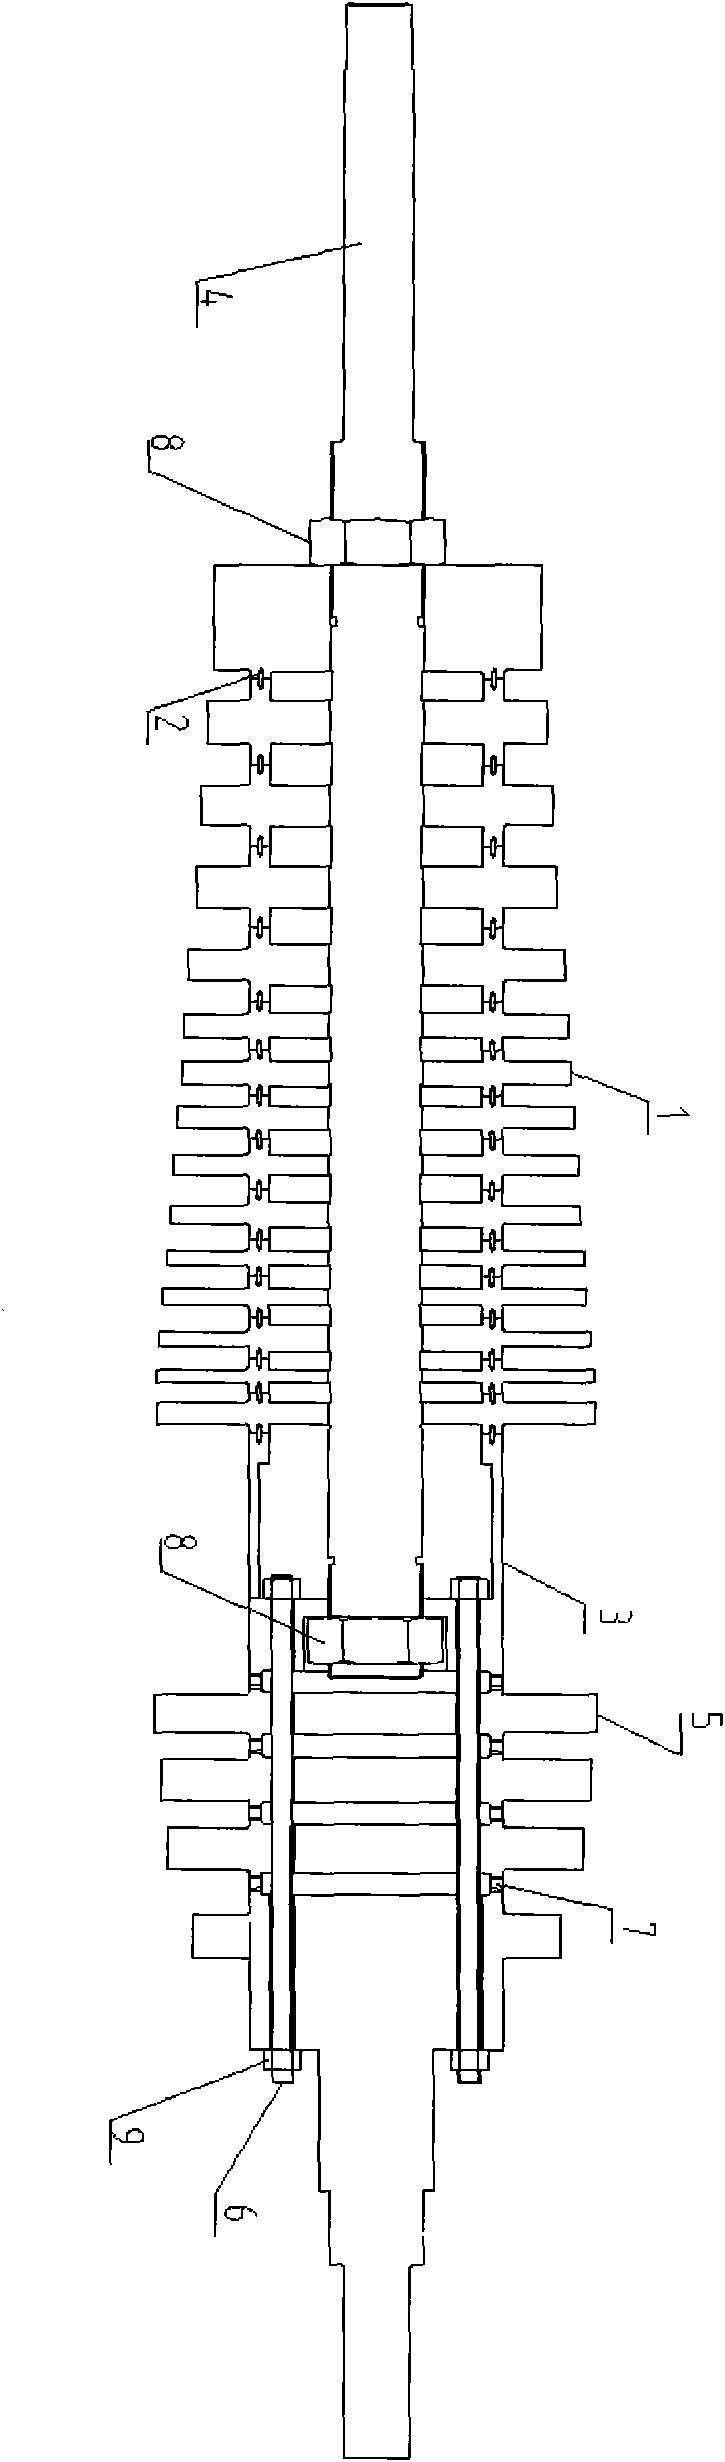 Disc-type rod fastening rotor structure for heavy-duty gas turbine